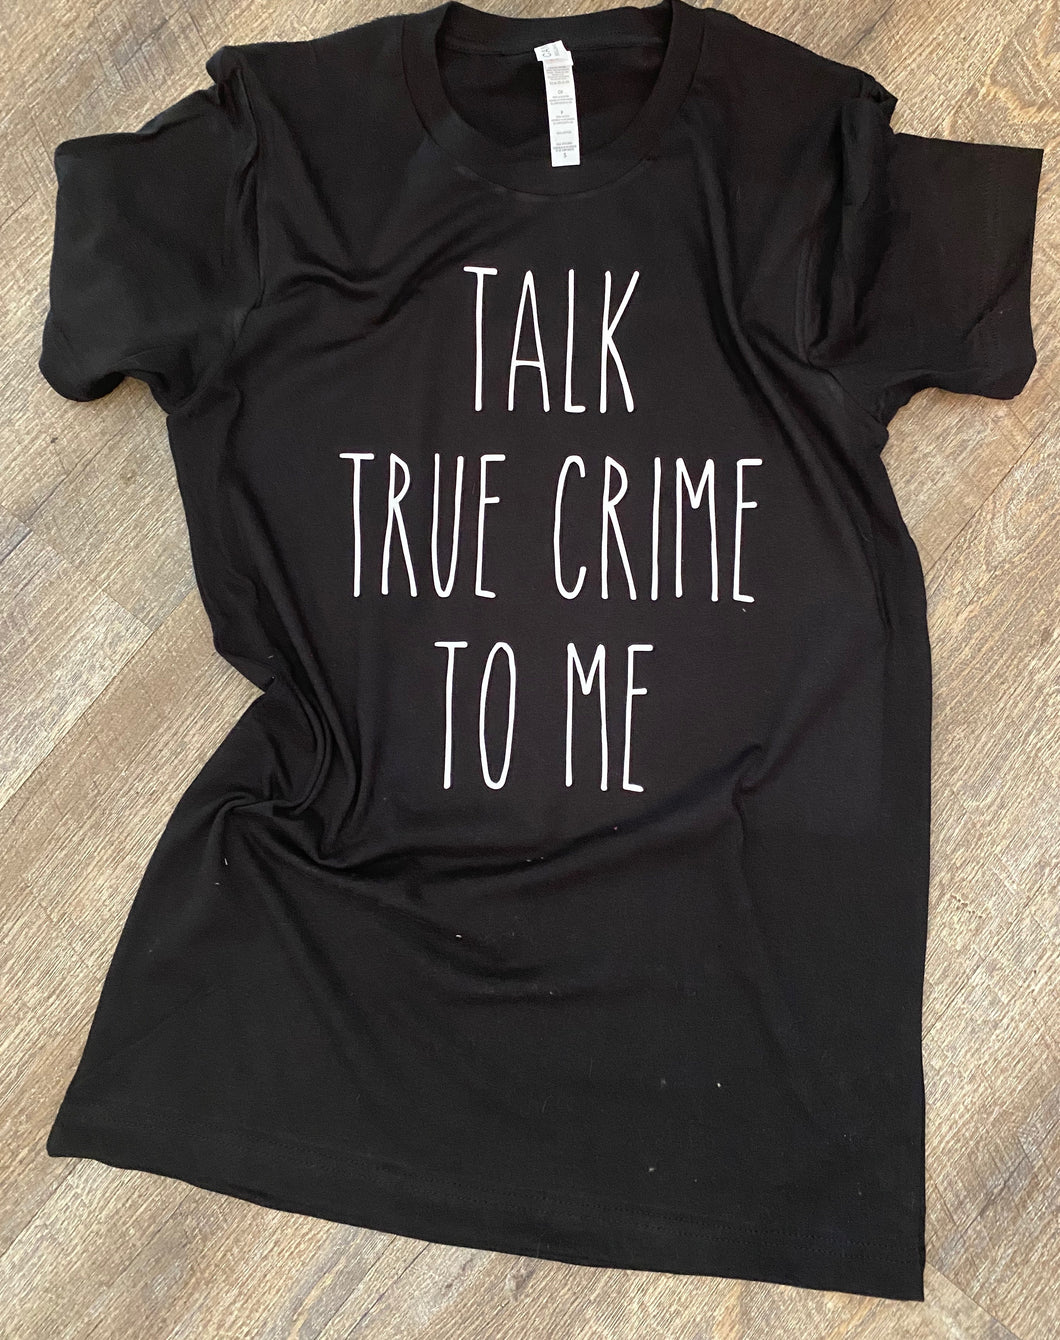 Talk true crime to me funny graphic tee long sleeve crew or hoodie - Mavictoria Designs Hot Press Express